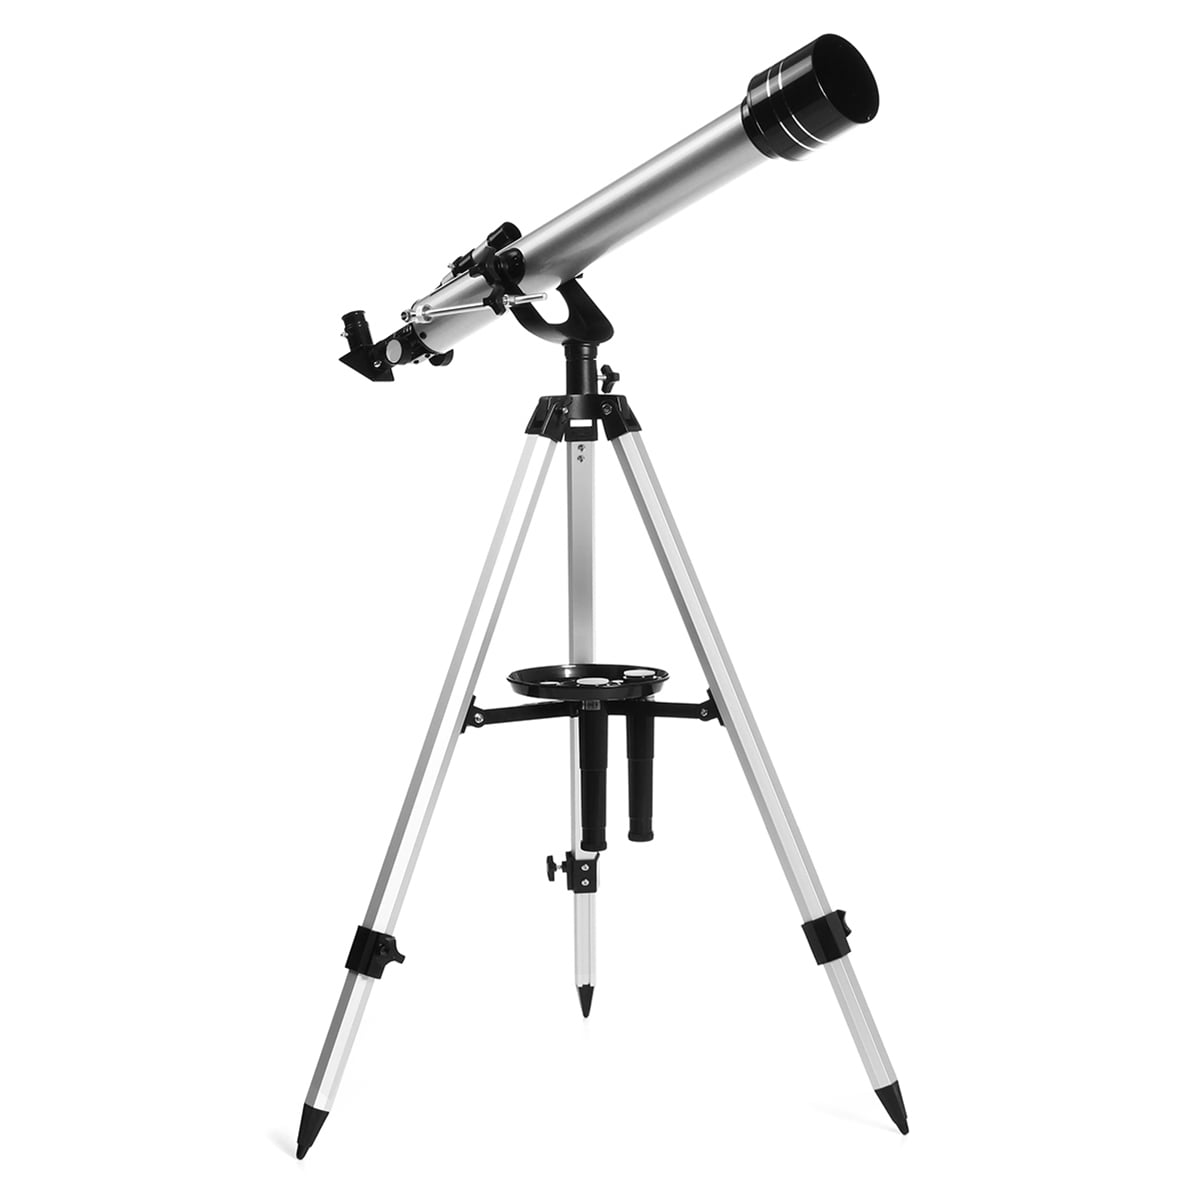 Color : Package 2 ARCH Telescopes for Astronomy Telescope for Kids and Beginners,125mm Caliber Reflection Telescope,Telescope with Adjustable Tripod and 5x24 Finder 